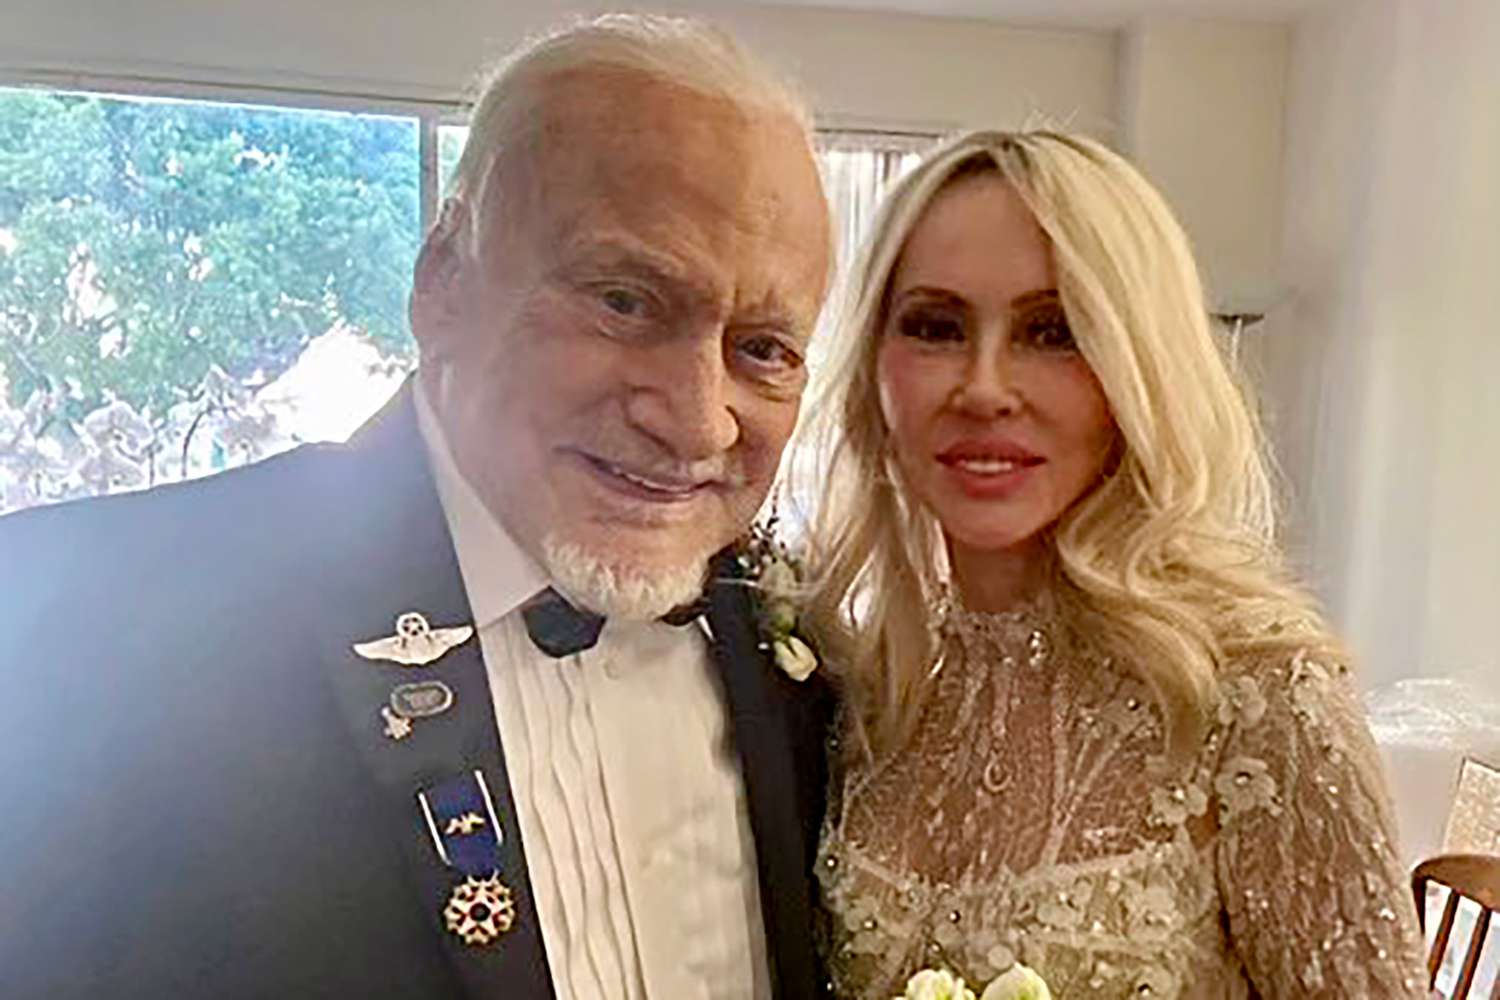 Buzz Aldrin Gets Married to Girlfriend Anca Faur on His 93rd Birthday: 'As Excited as Eloping Teens'. https://twitter.com/TheRealBuzz/status/1616600085441159168. Buzz Aldrin/Twitter